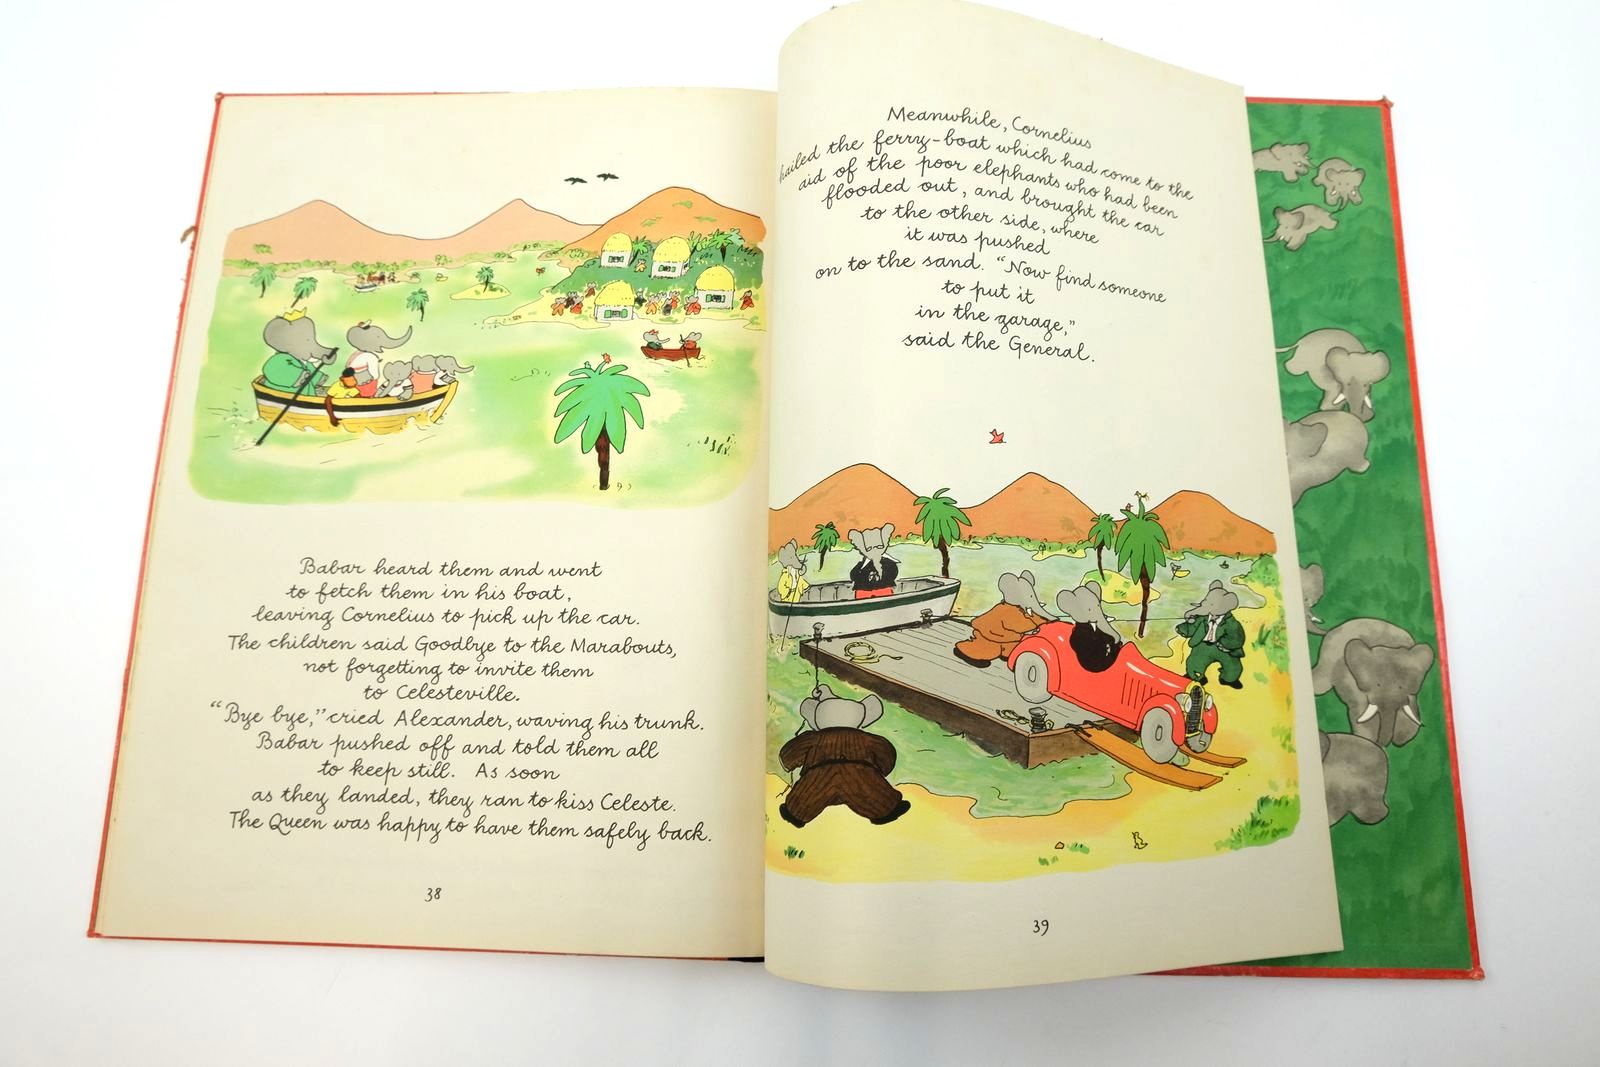 Photo of PICNIC AT BABAR'S written by De Brunhoff, Laurent illustrated by De Brunhoff, Laurent published by Methuen & Co. Ltd. (STOCK CODE: 2140226)  for sale by Stella & Rose's Books